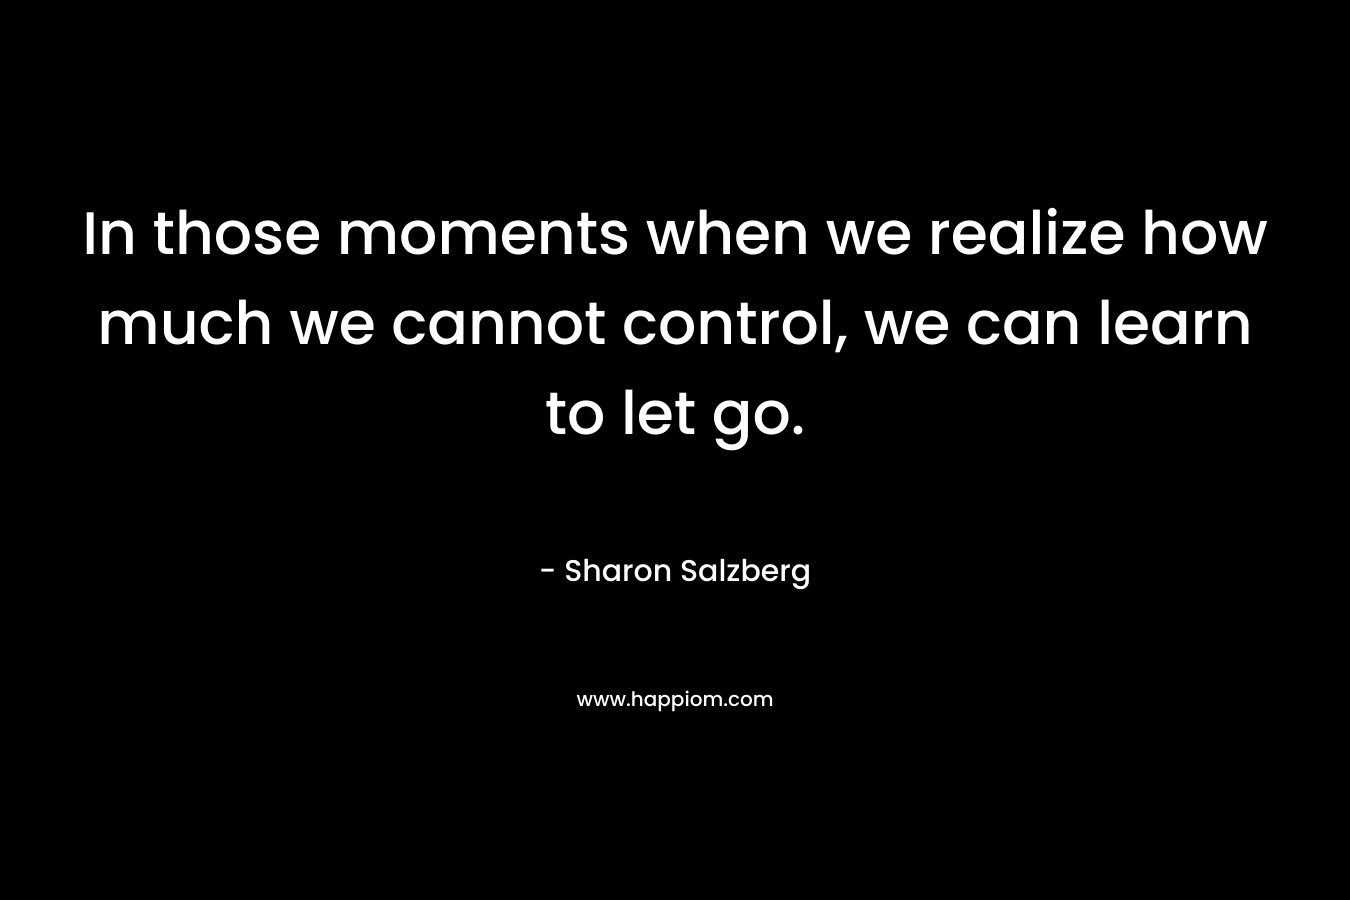 In those moments when we realize how much we cannot control, we can learn to let go. – Sharon Salzberg